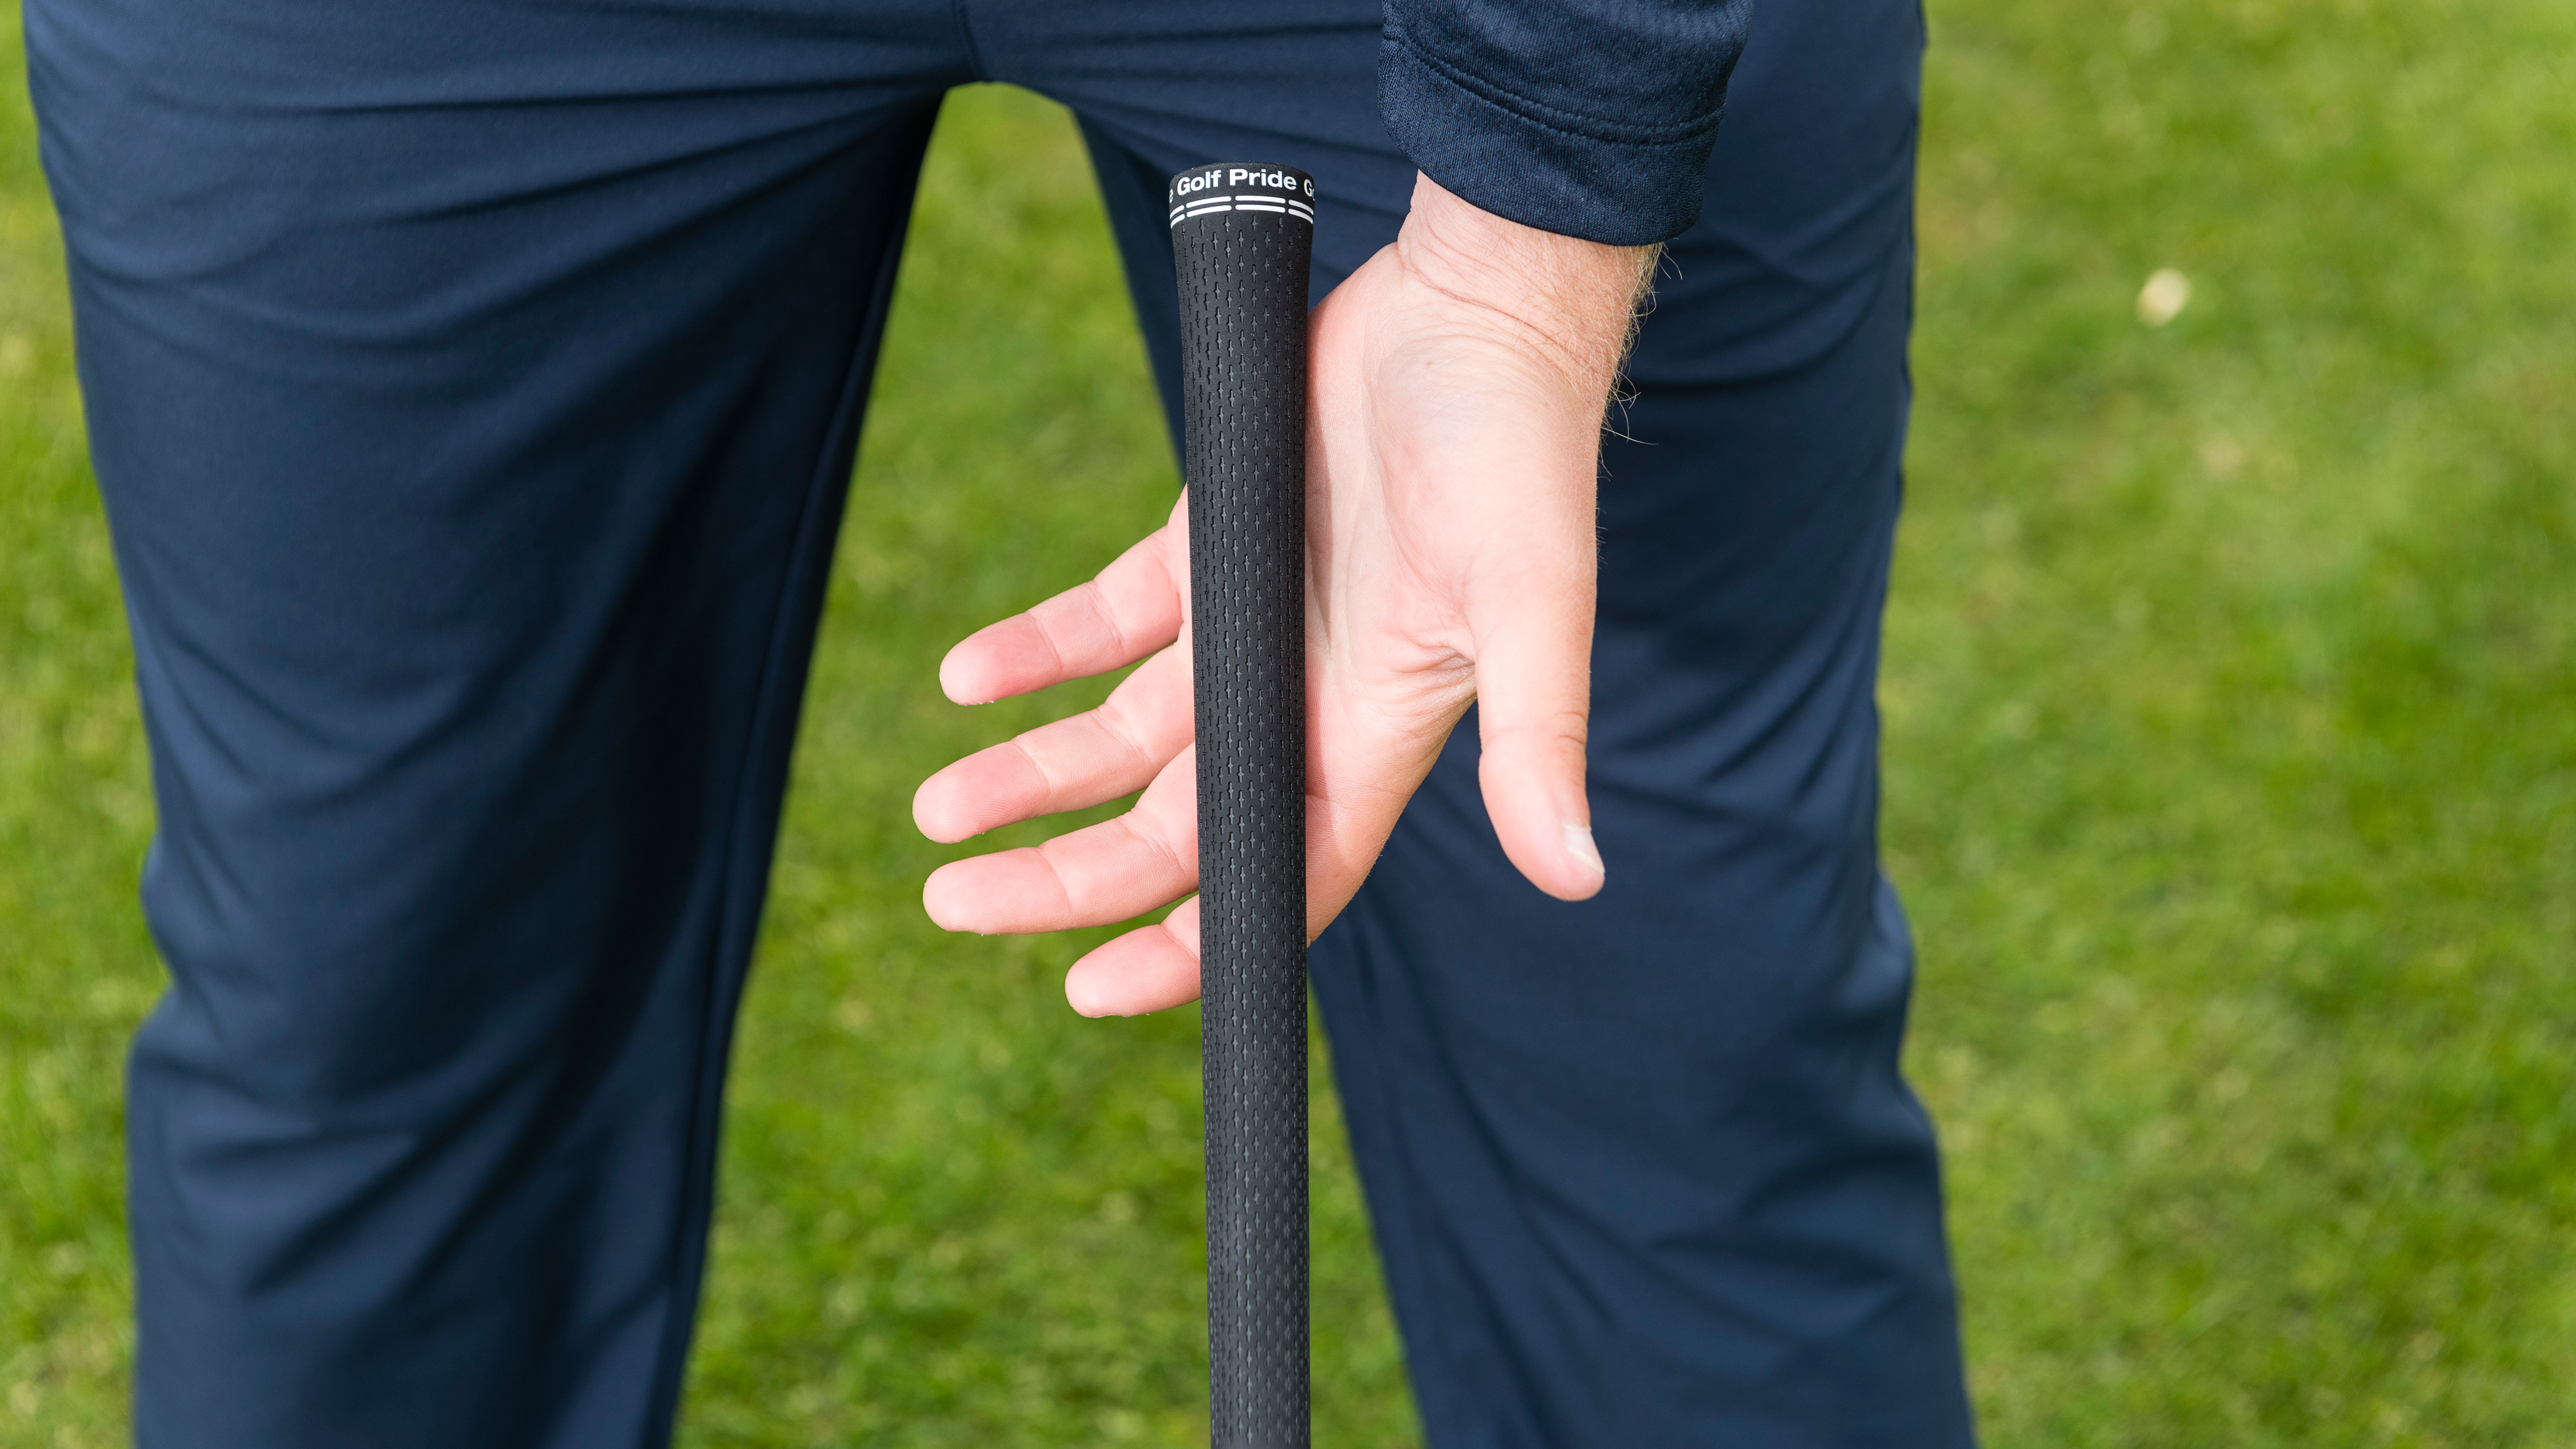 PGA pro Liam James showing how to grip a golf club with your lead hand